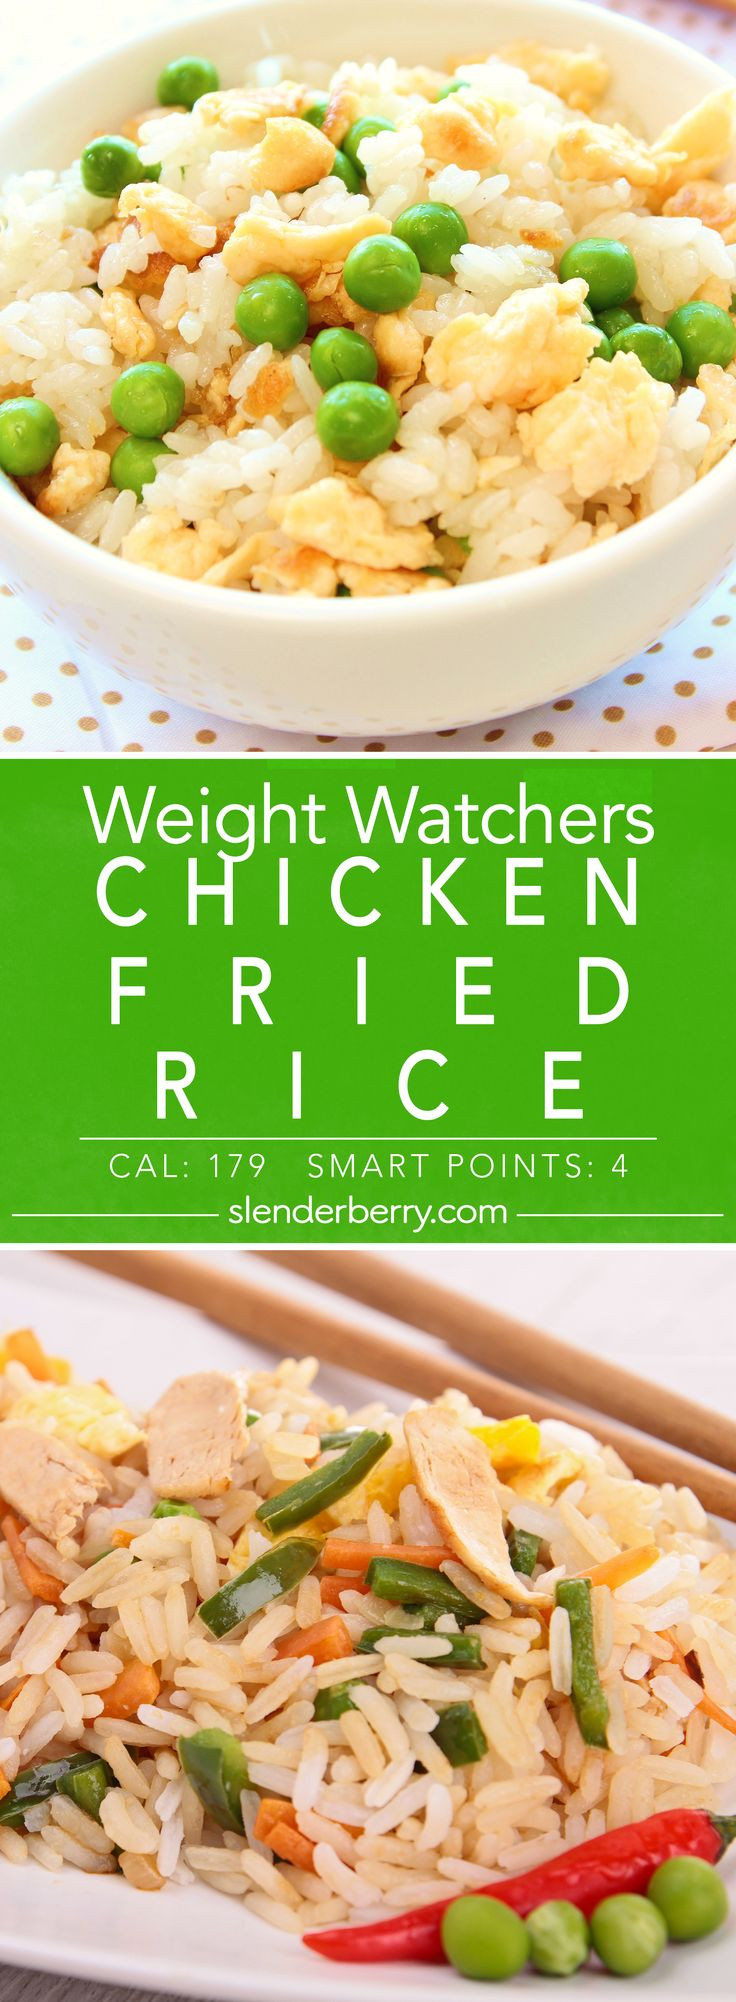 Weight Watchers Chicken Fried Rice
 best images about WW friendly meals on Pinterest